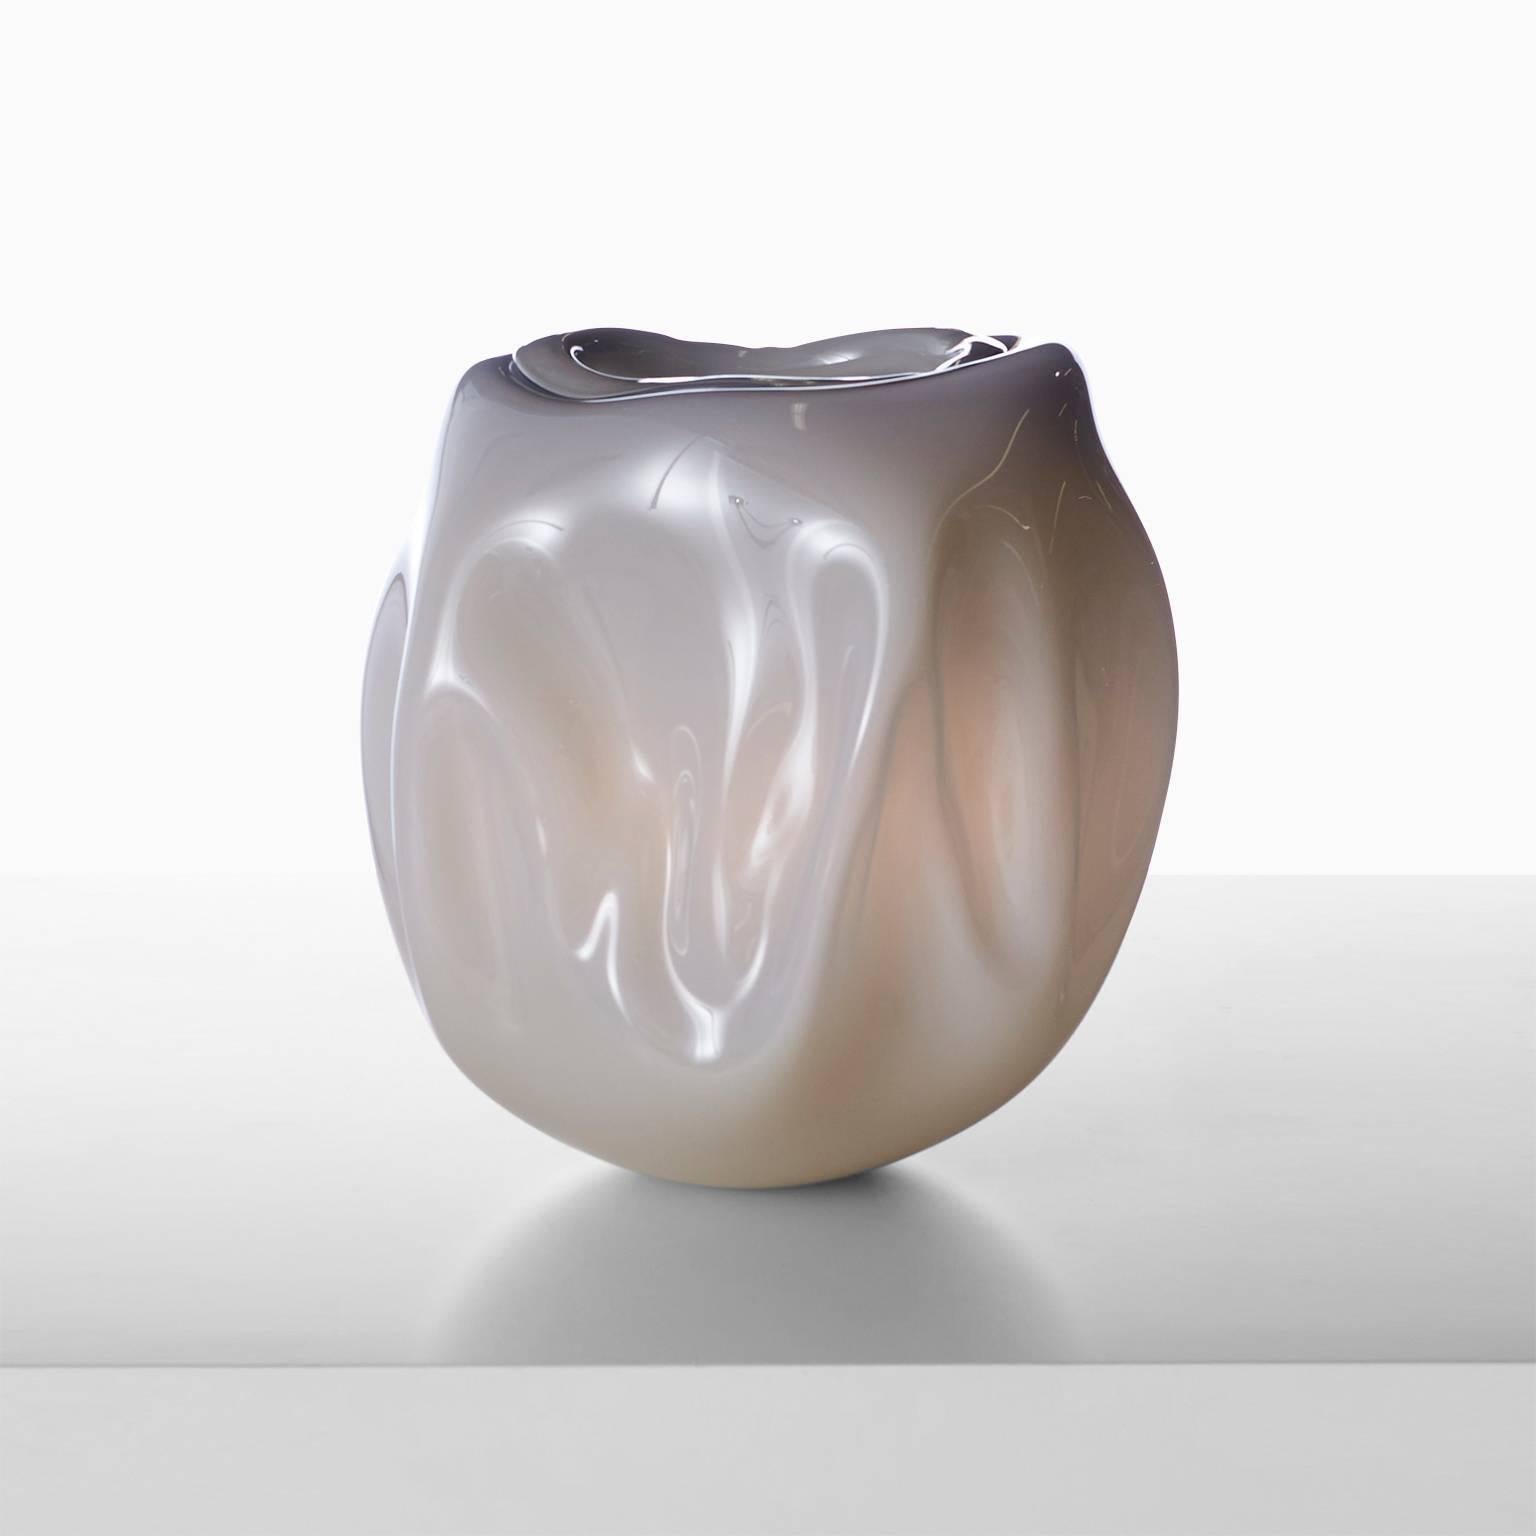 An exceptional free handblown vase in gray color by celebrated French glass blower Jeremy Maxwell Wintrebert, France, circa 2016.